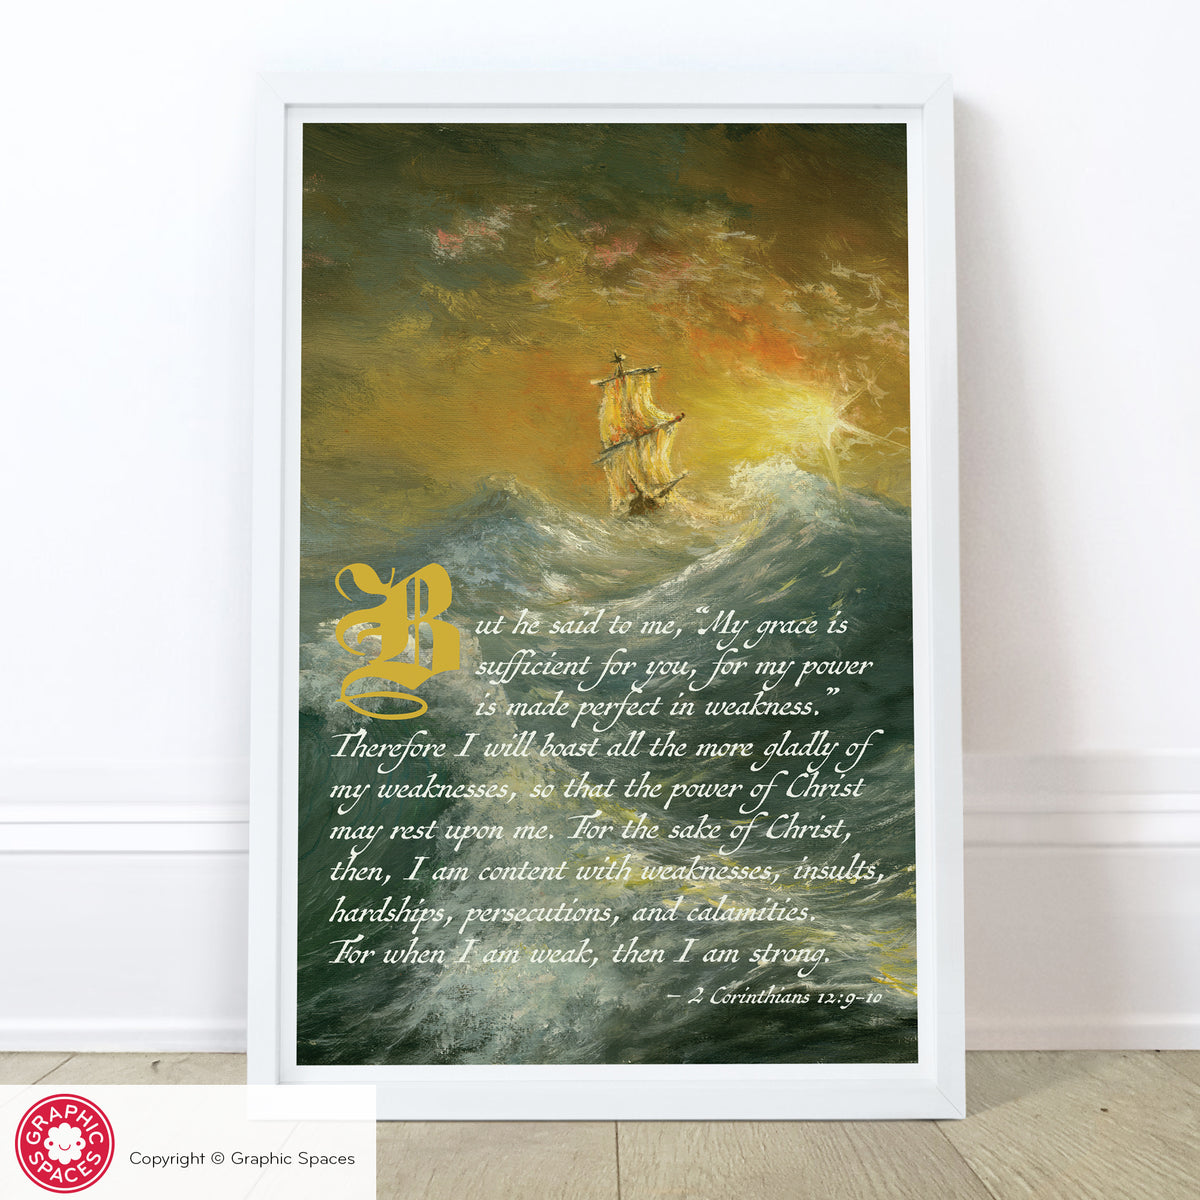 My Grace is Sufficient for You, 2 Corinthians 12:9-10 - Peel &amp; Stick Poster